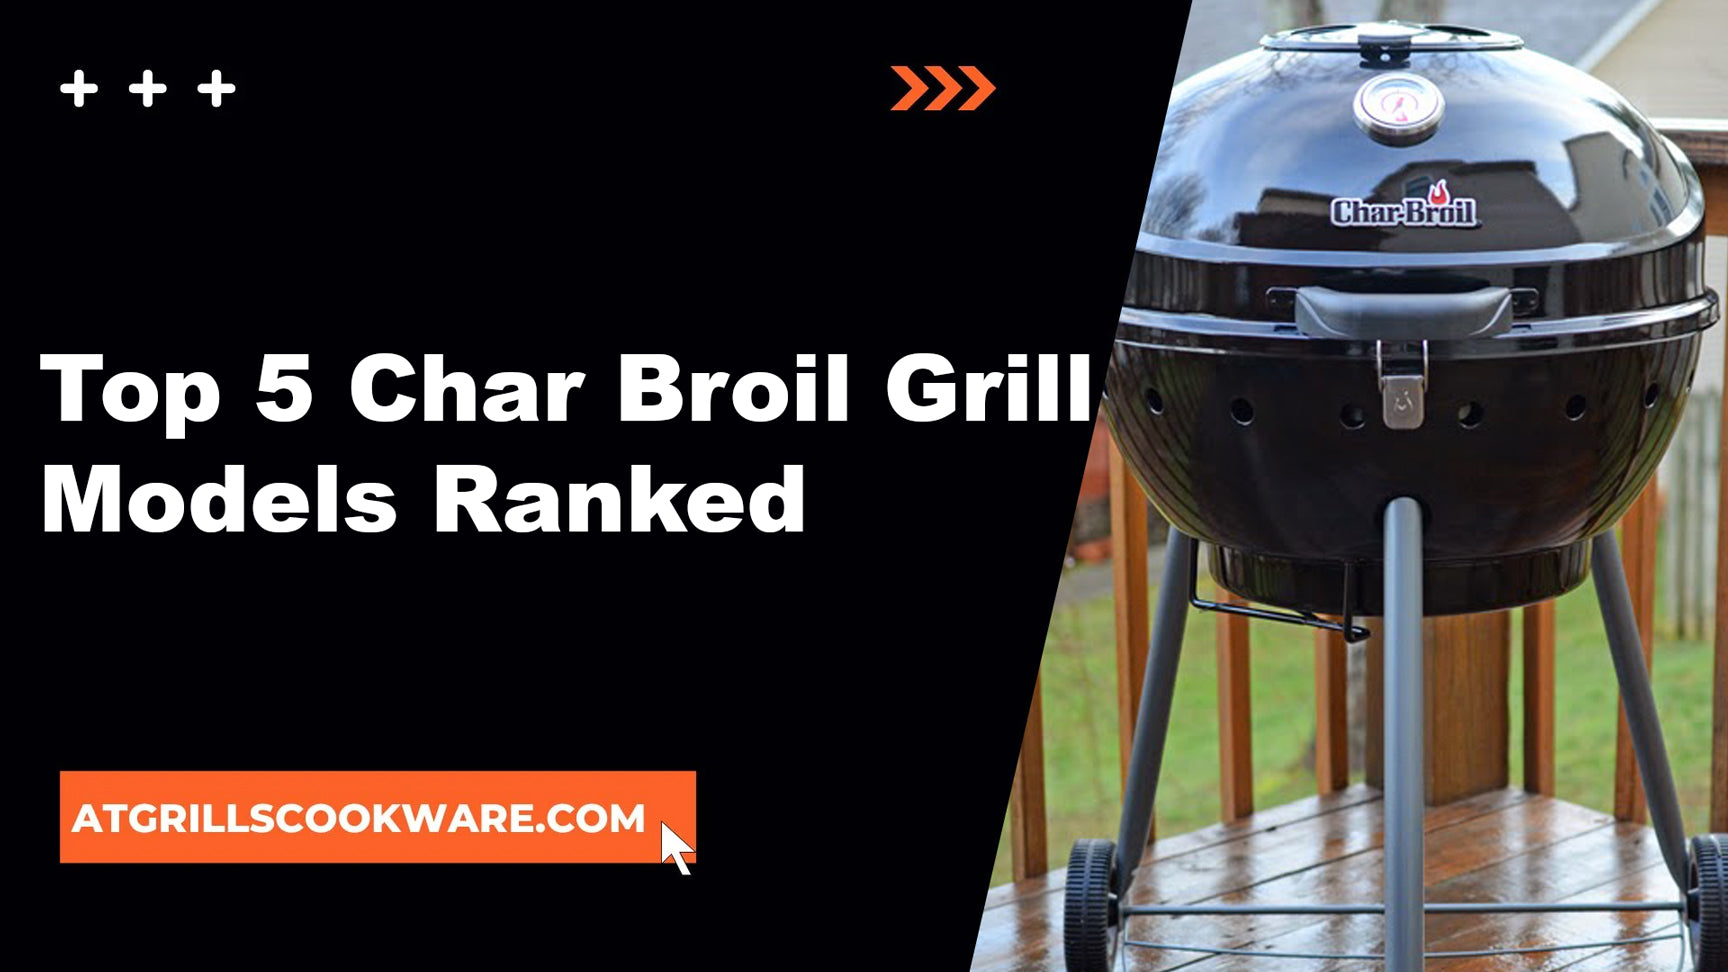 The Top 5 Char Broil Grill Models Ranked